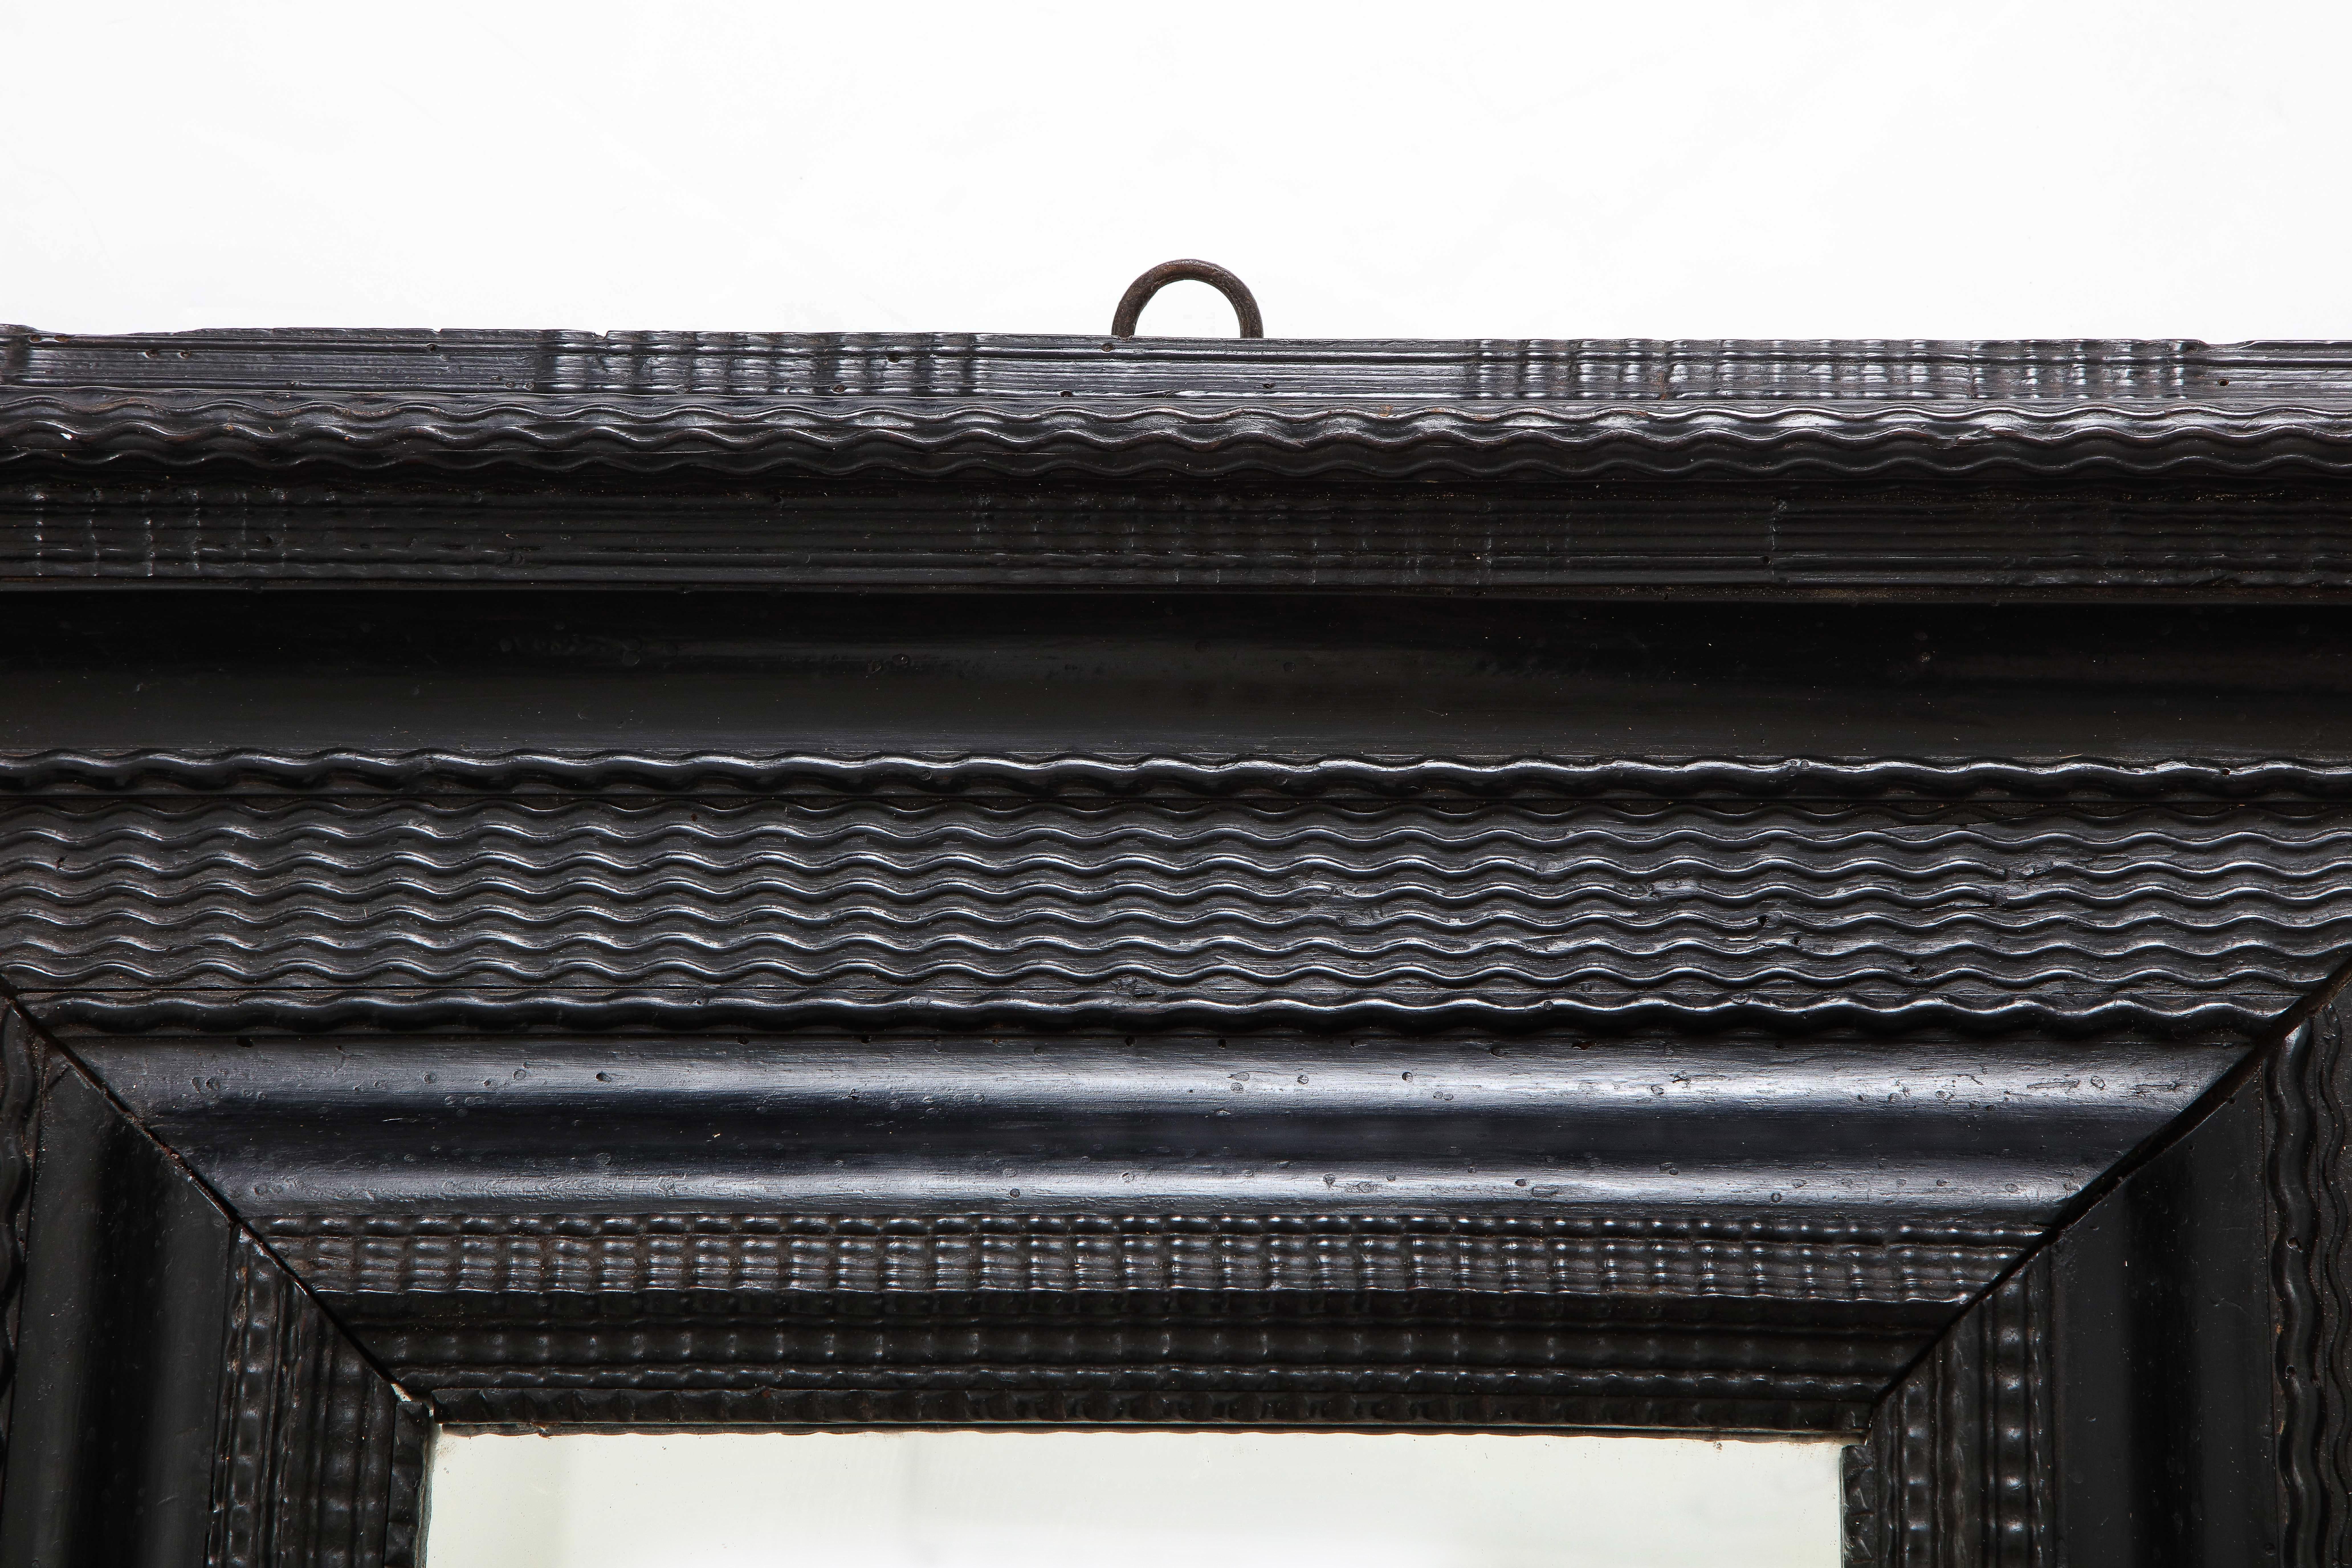 An exceptional Northern Italian Baroque intricately carved ebonized frame, inset with old mercury glass. The frame with cove carved 'ripple' molding and its original forged iron hook on the back. These style of frames are usually referred to as